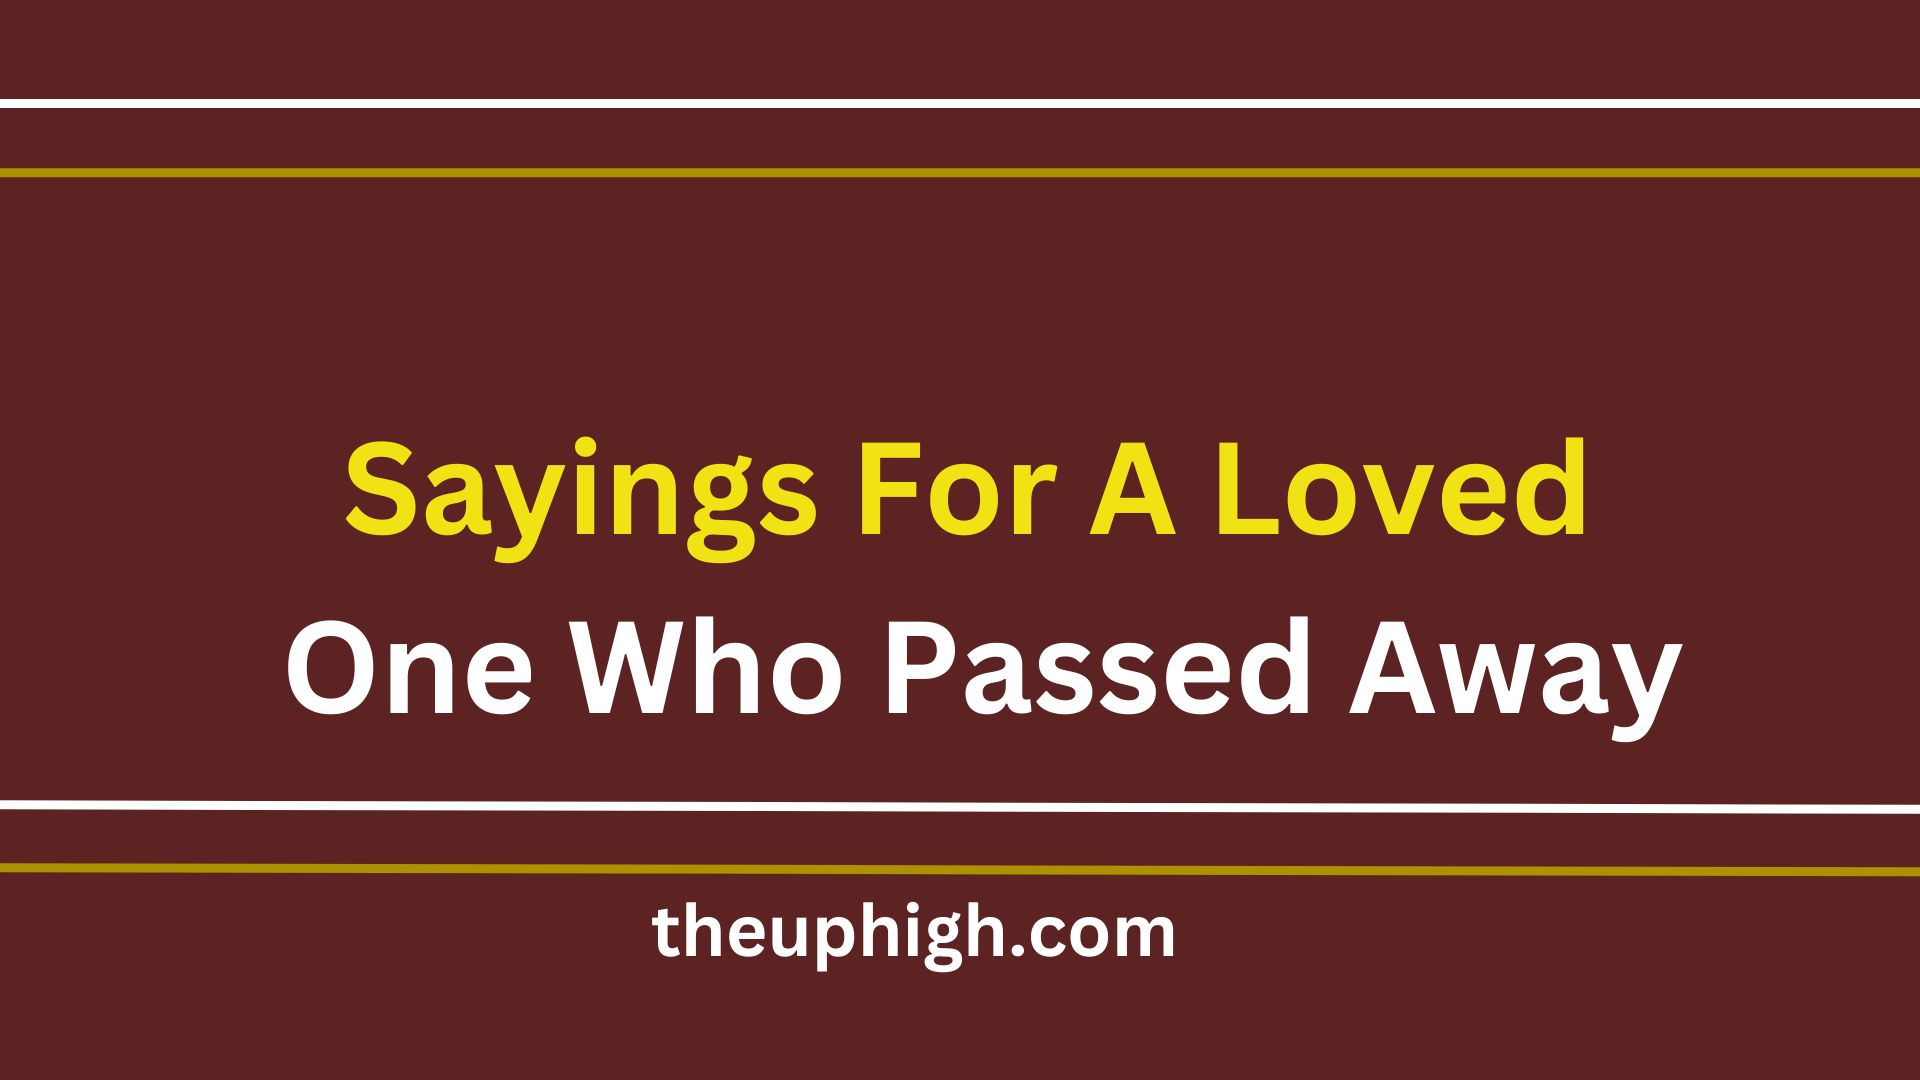 Sayings For A Loved One Who Passed Away